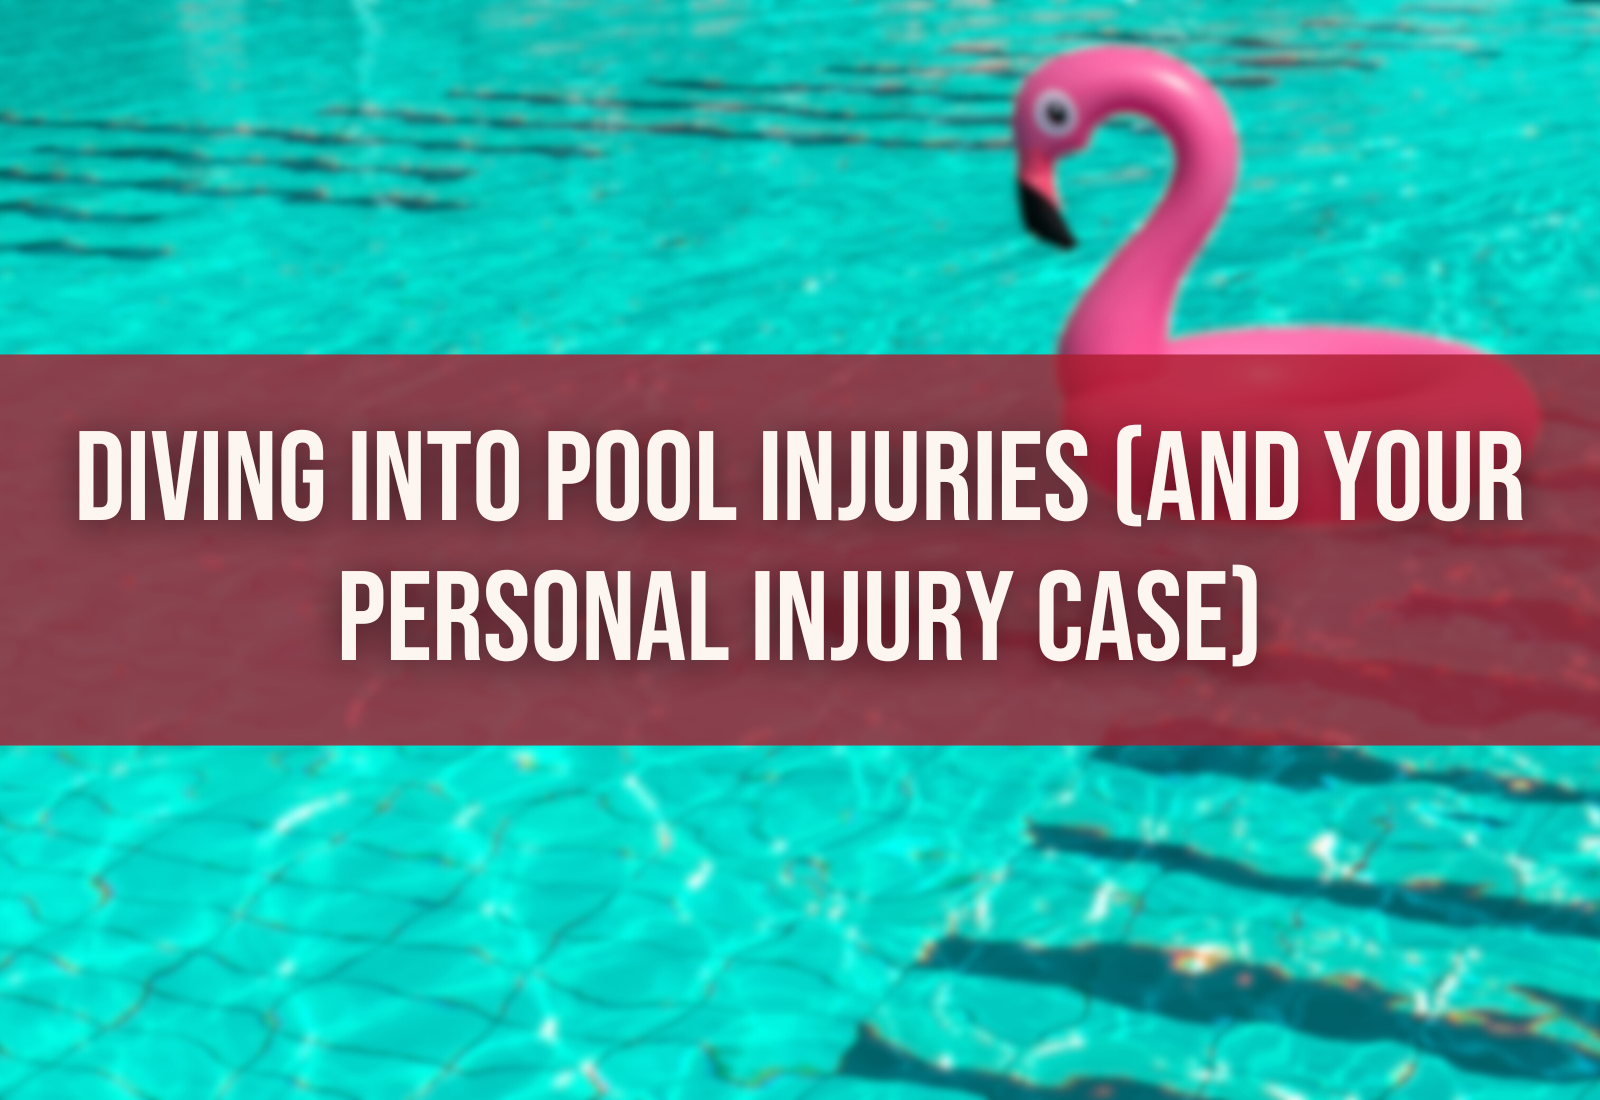 Diving into pool injuries and your personal injury case on red rectangle. Background pool with pink flamingo floaty.